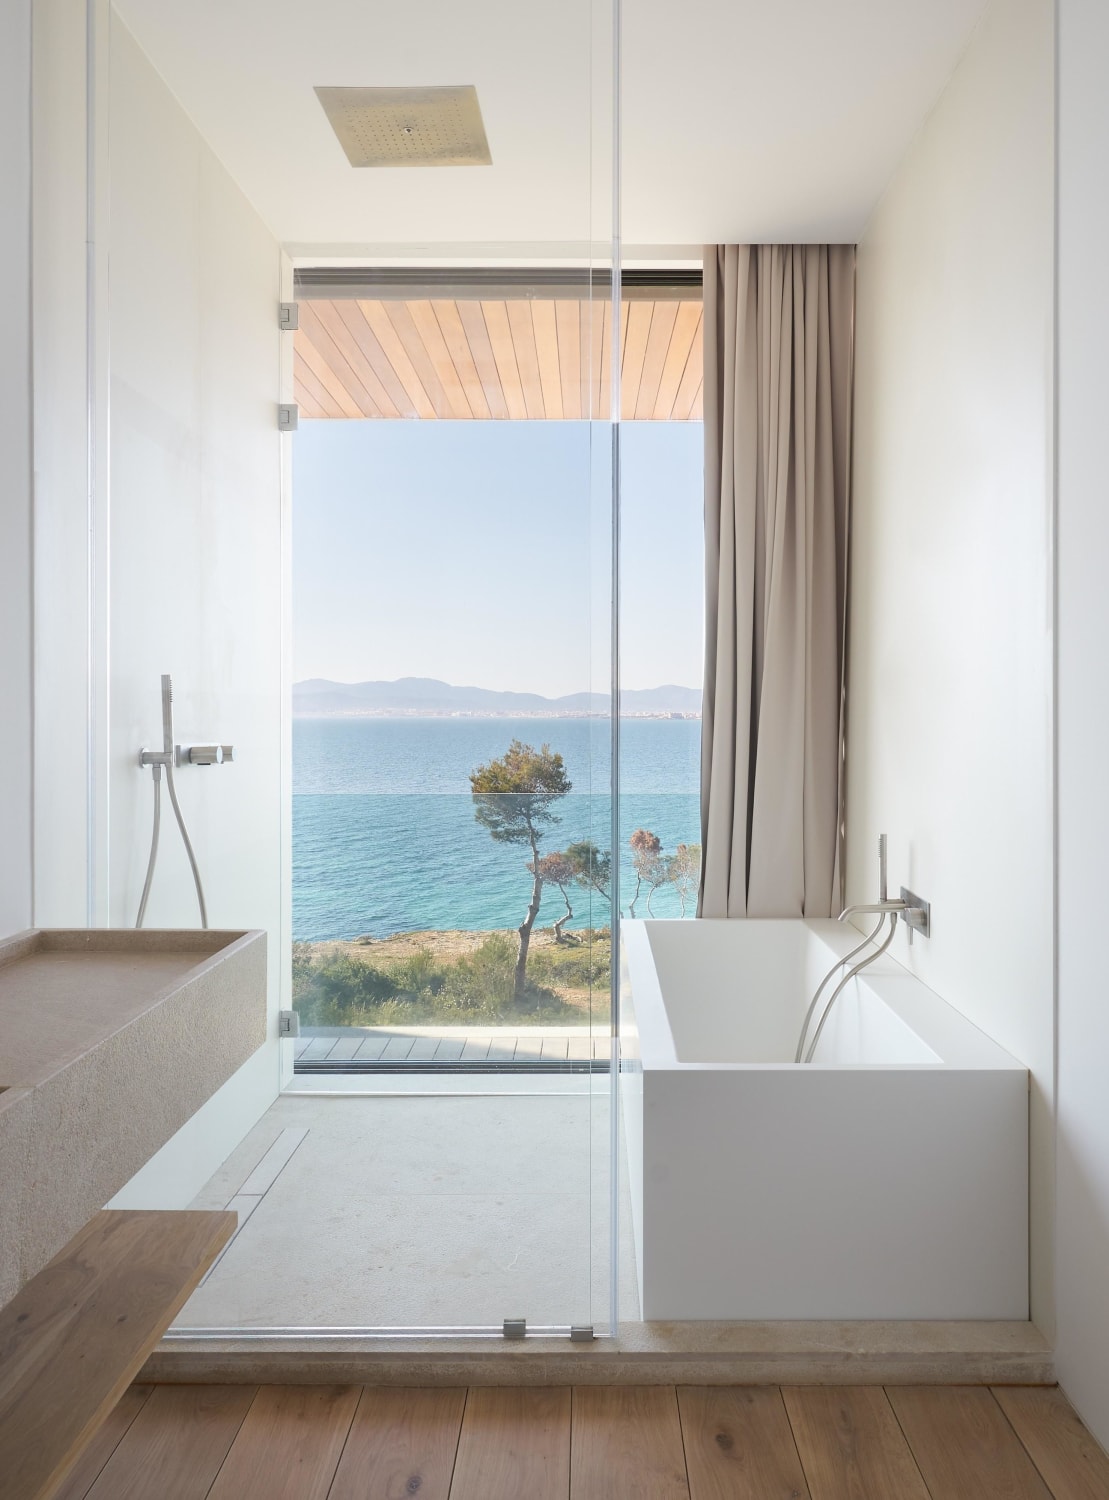 Bathroom opening up to outdoor deck with views toward Bay of Palma, Mallorca, Spain by Jorge Bibiloni Studio